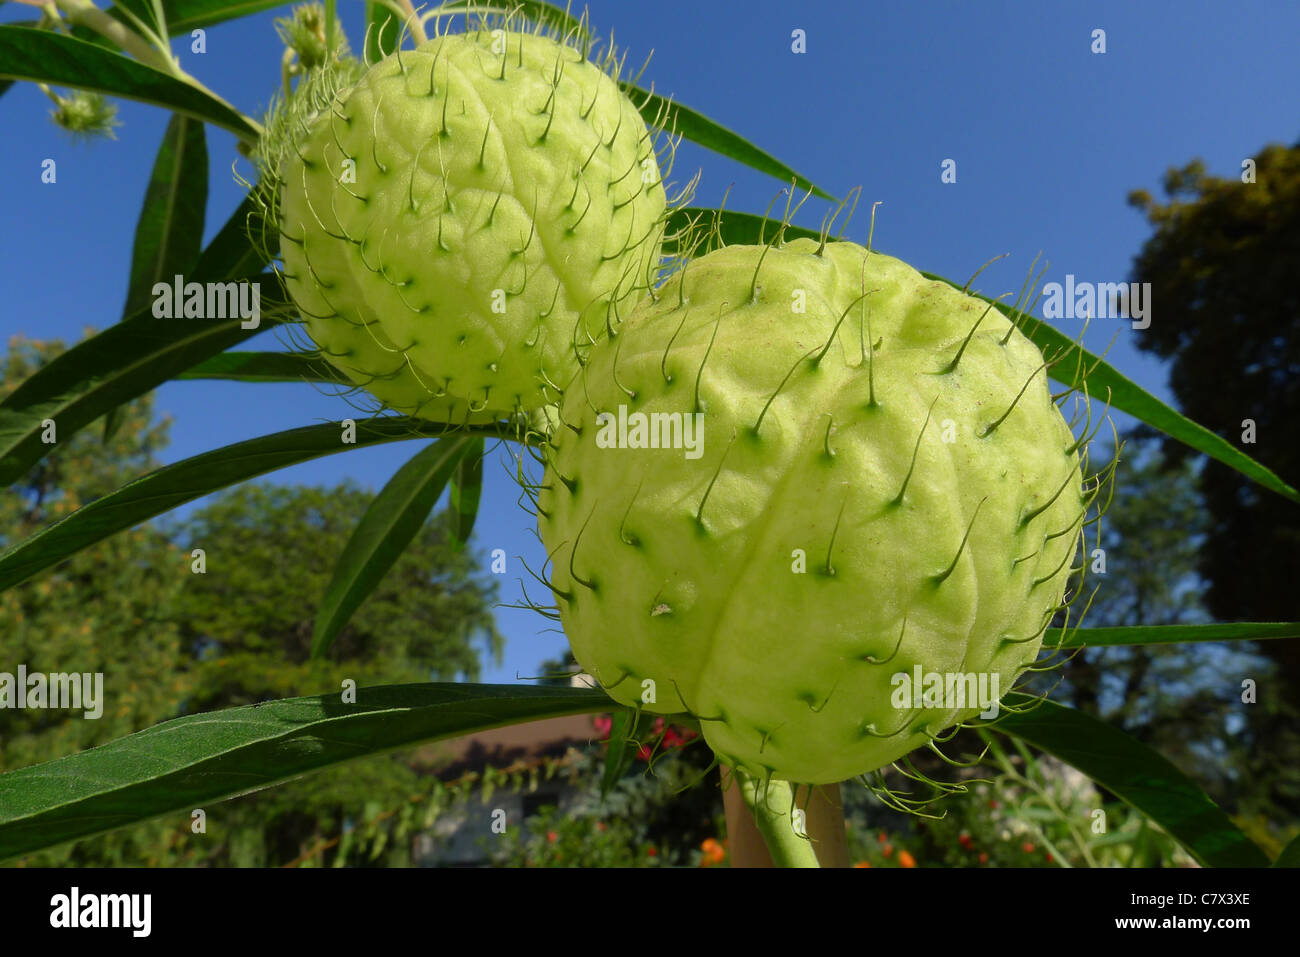 The balloon-like seedpods of Gomphocarpus physocarpus also known as Asclepias physocarpa and the common name Balloon cotton bush Stock Photo